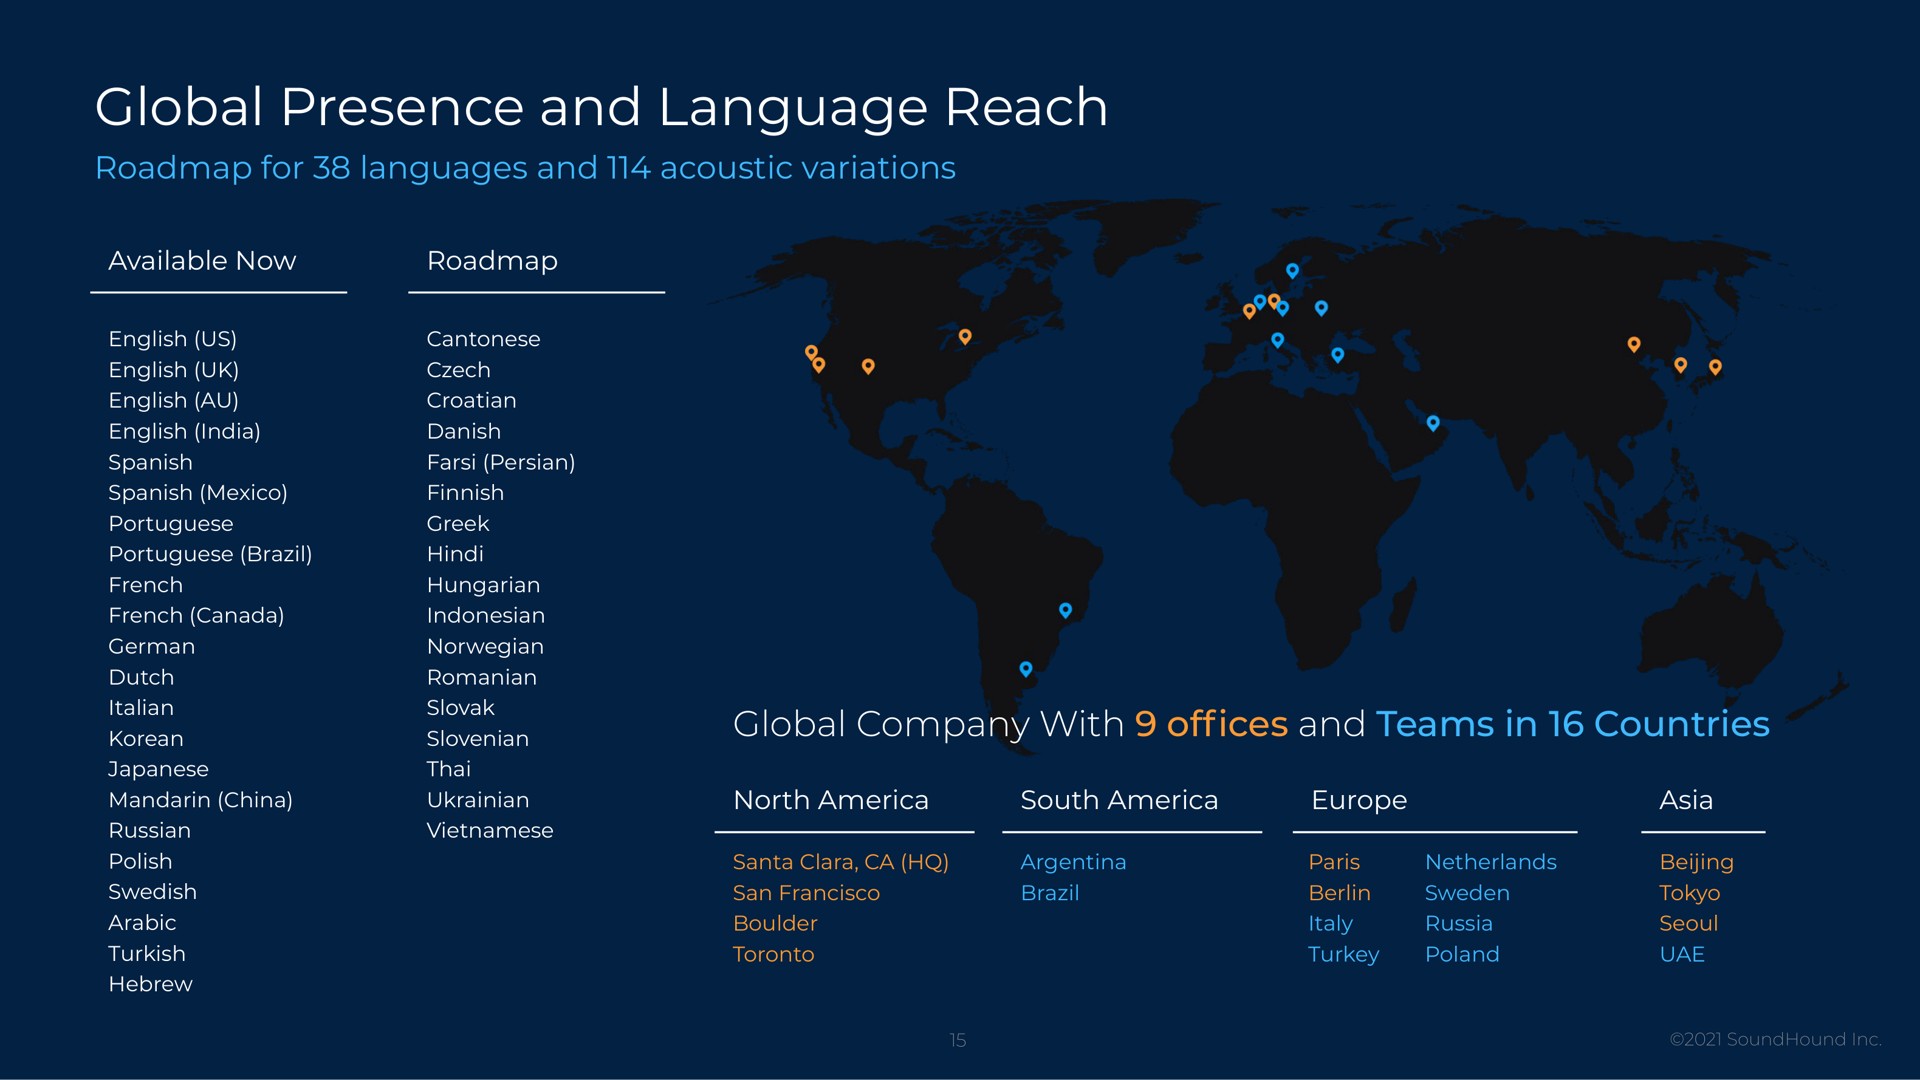 global presence and language reach global company with of ces and teams in countries | SoundHound